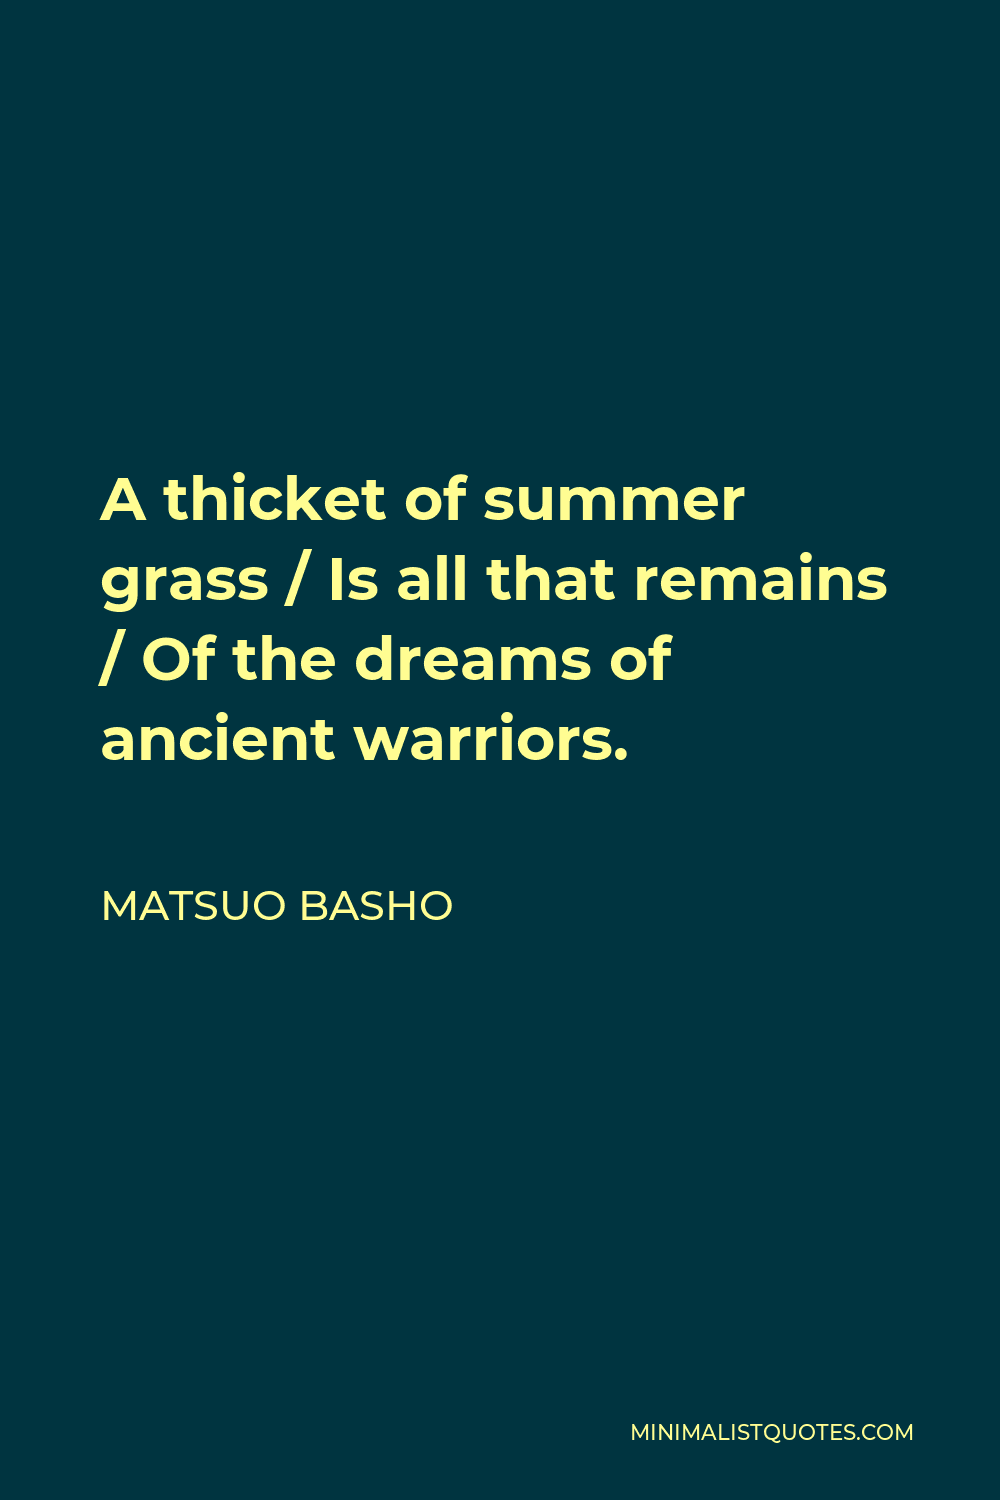 Matsuo Basho Quote - A thicket of summer grass / Is all that remains / Of the dreams of ancient warriors.